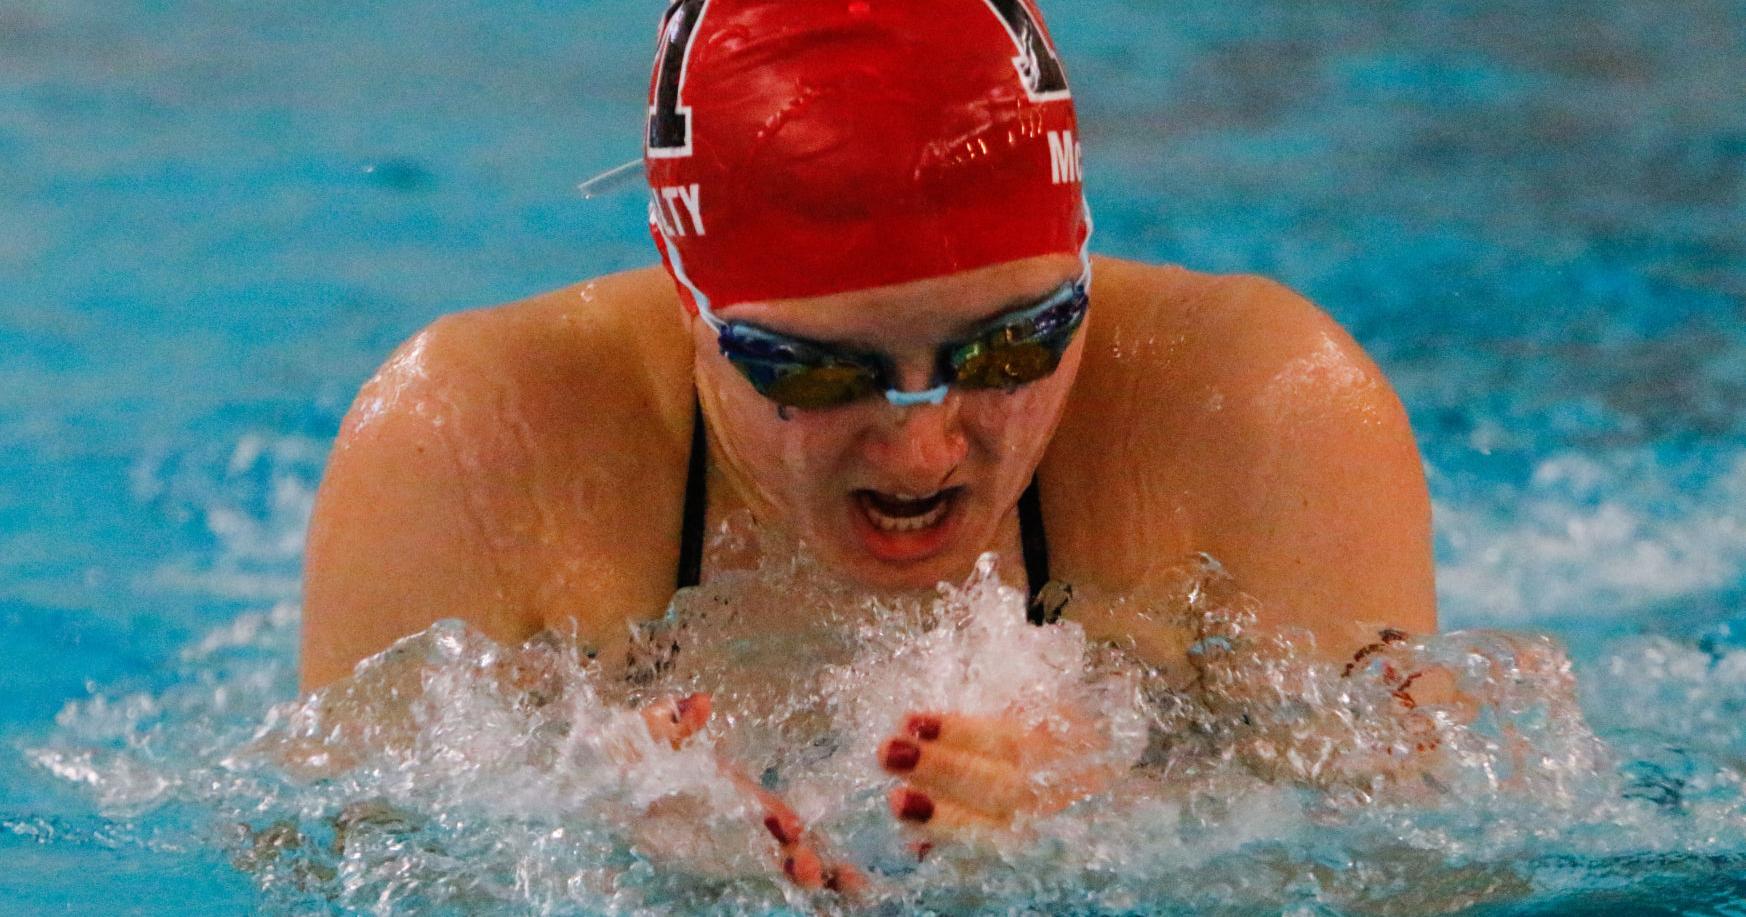 Munster's NCC dominance in the pool continues, Hobart sweeps diving